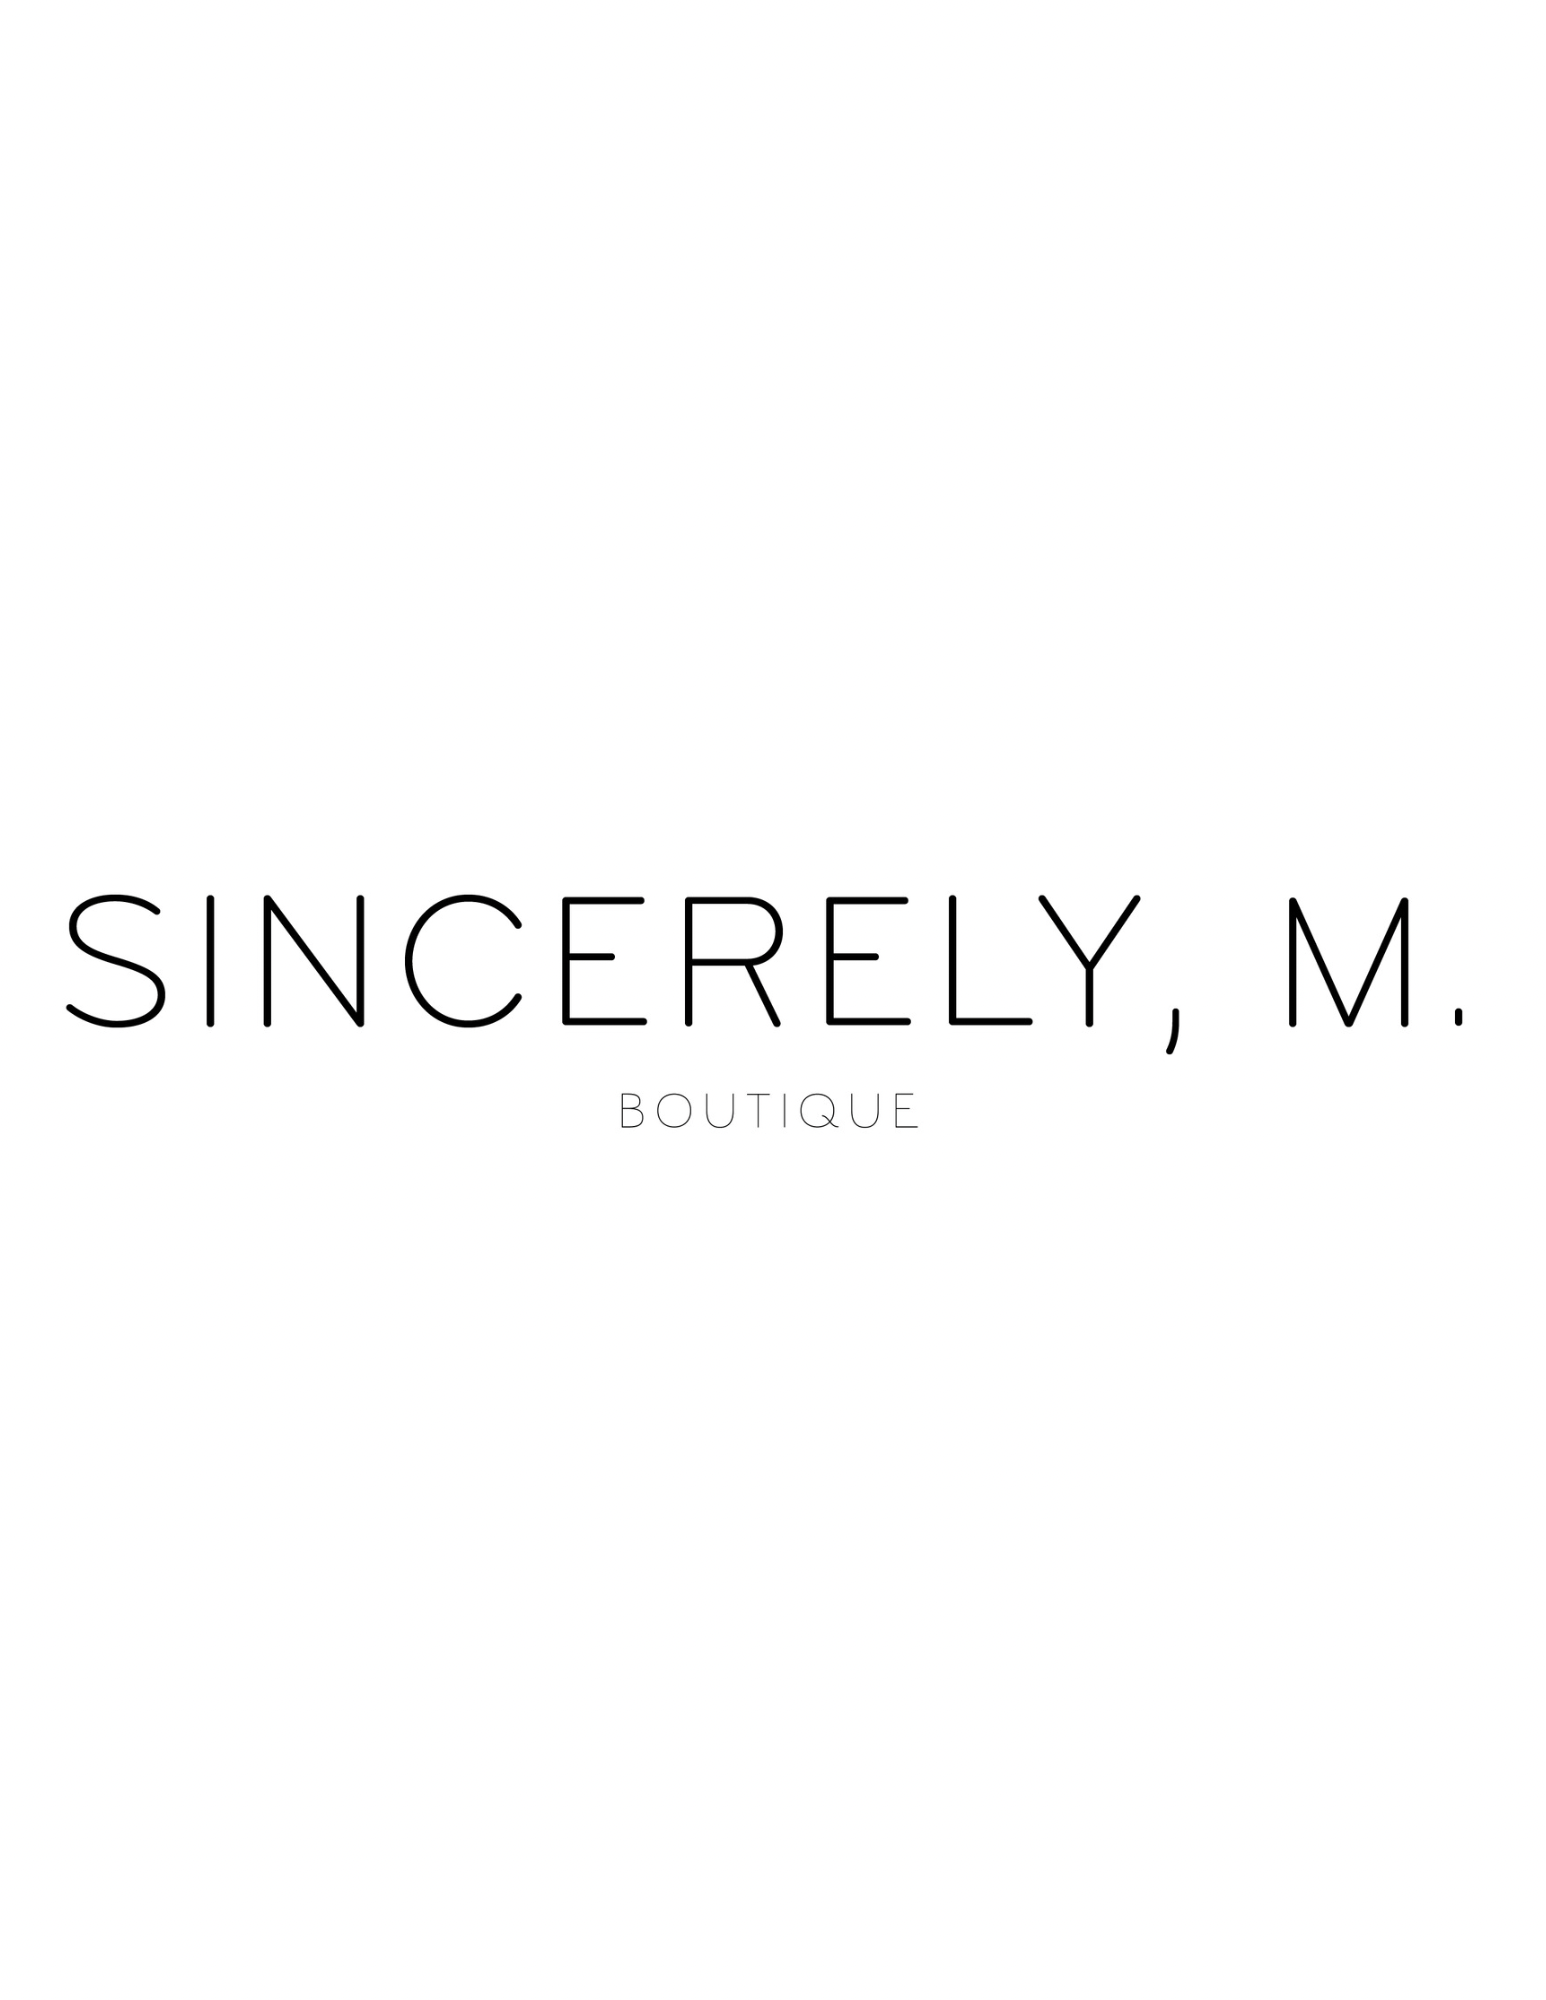 Sincerely, Nhia - an online boutique